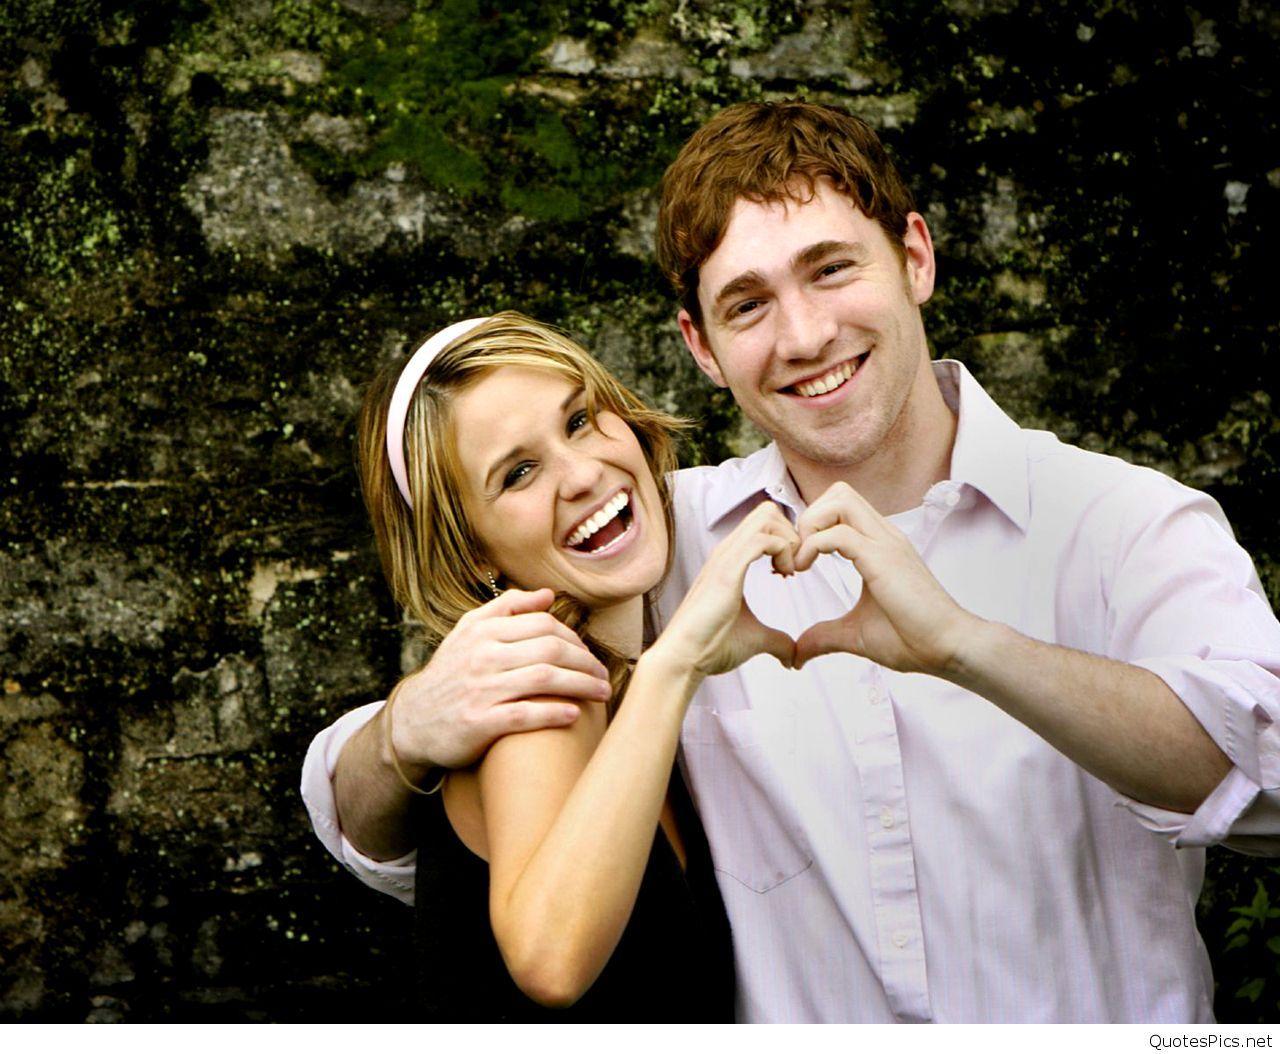 Amazing love couple wallpaper for Facebook picture